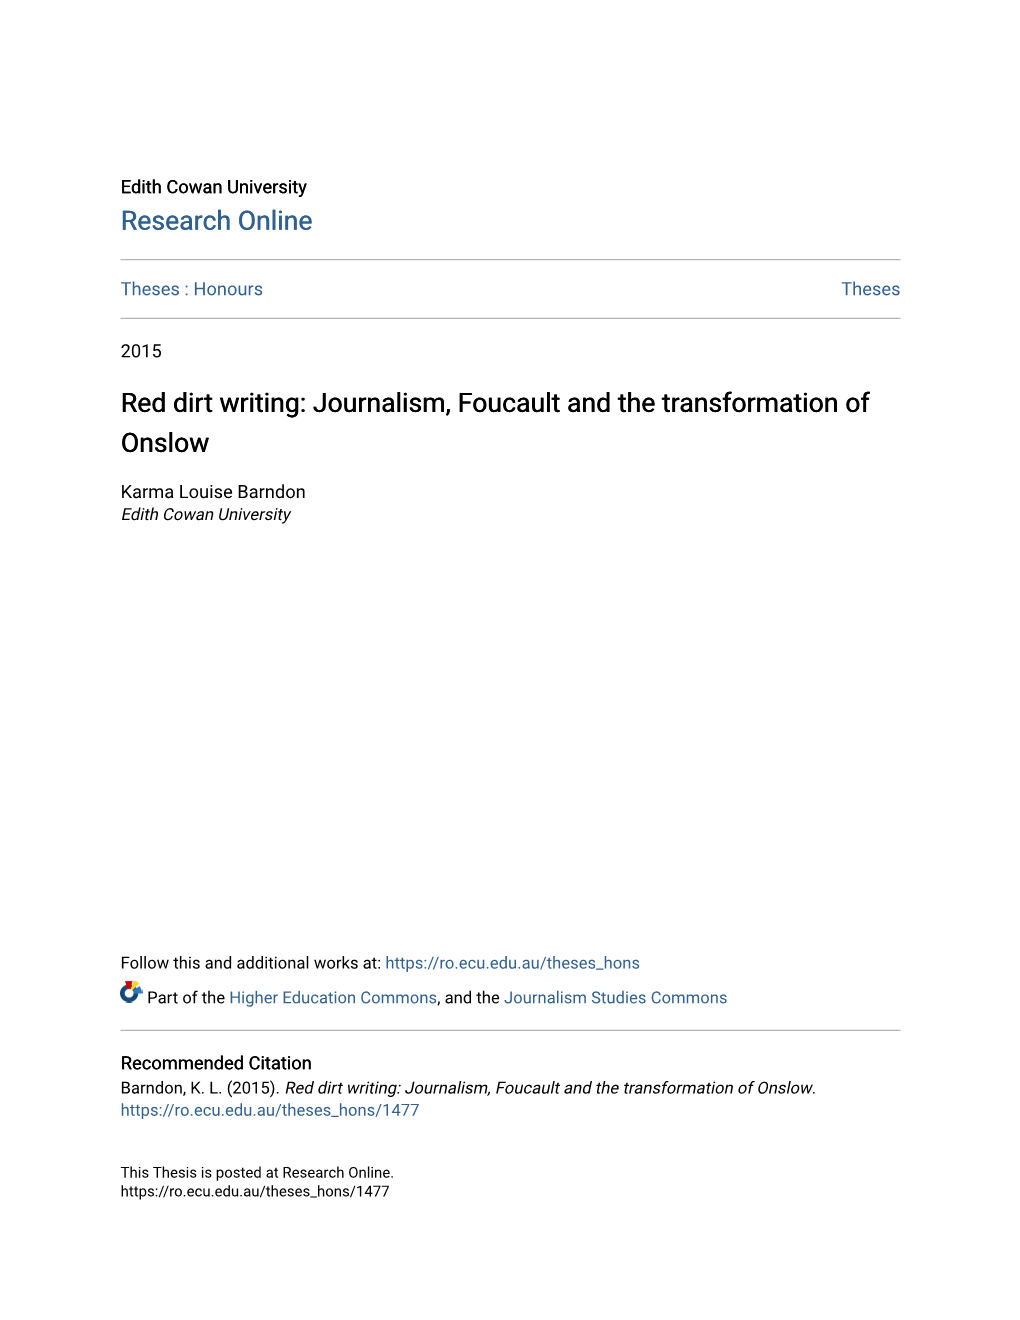 Red Dirt Writing: Journalism, Foucault and the Transformation of Onslow